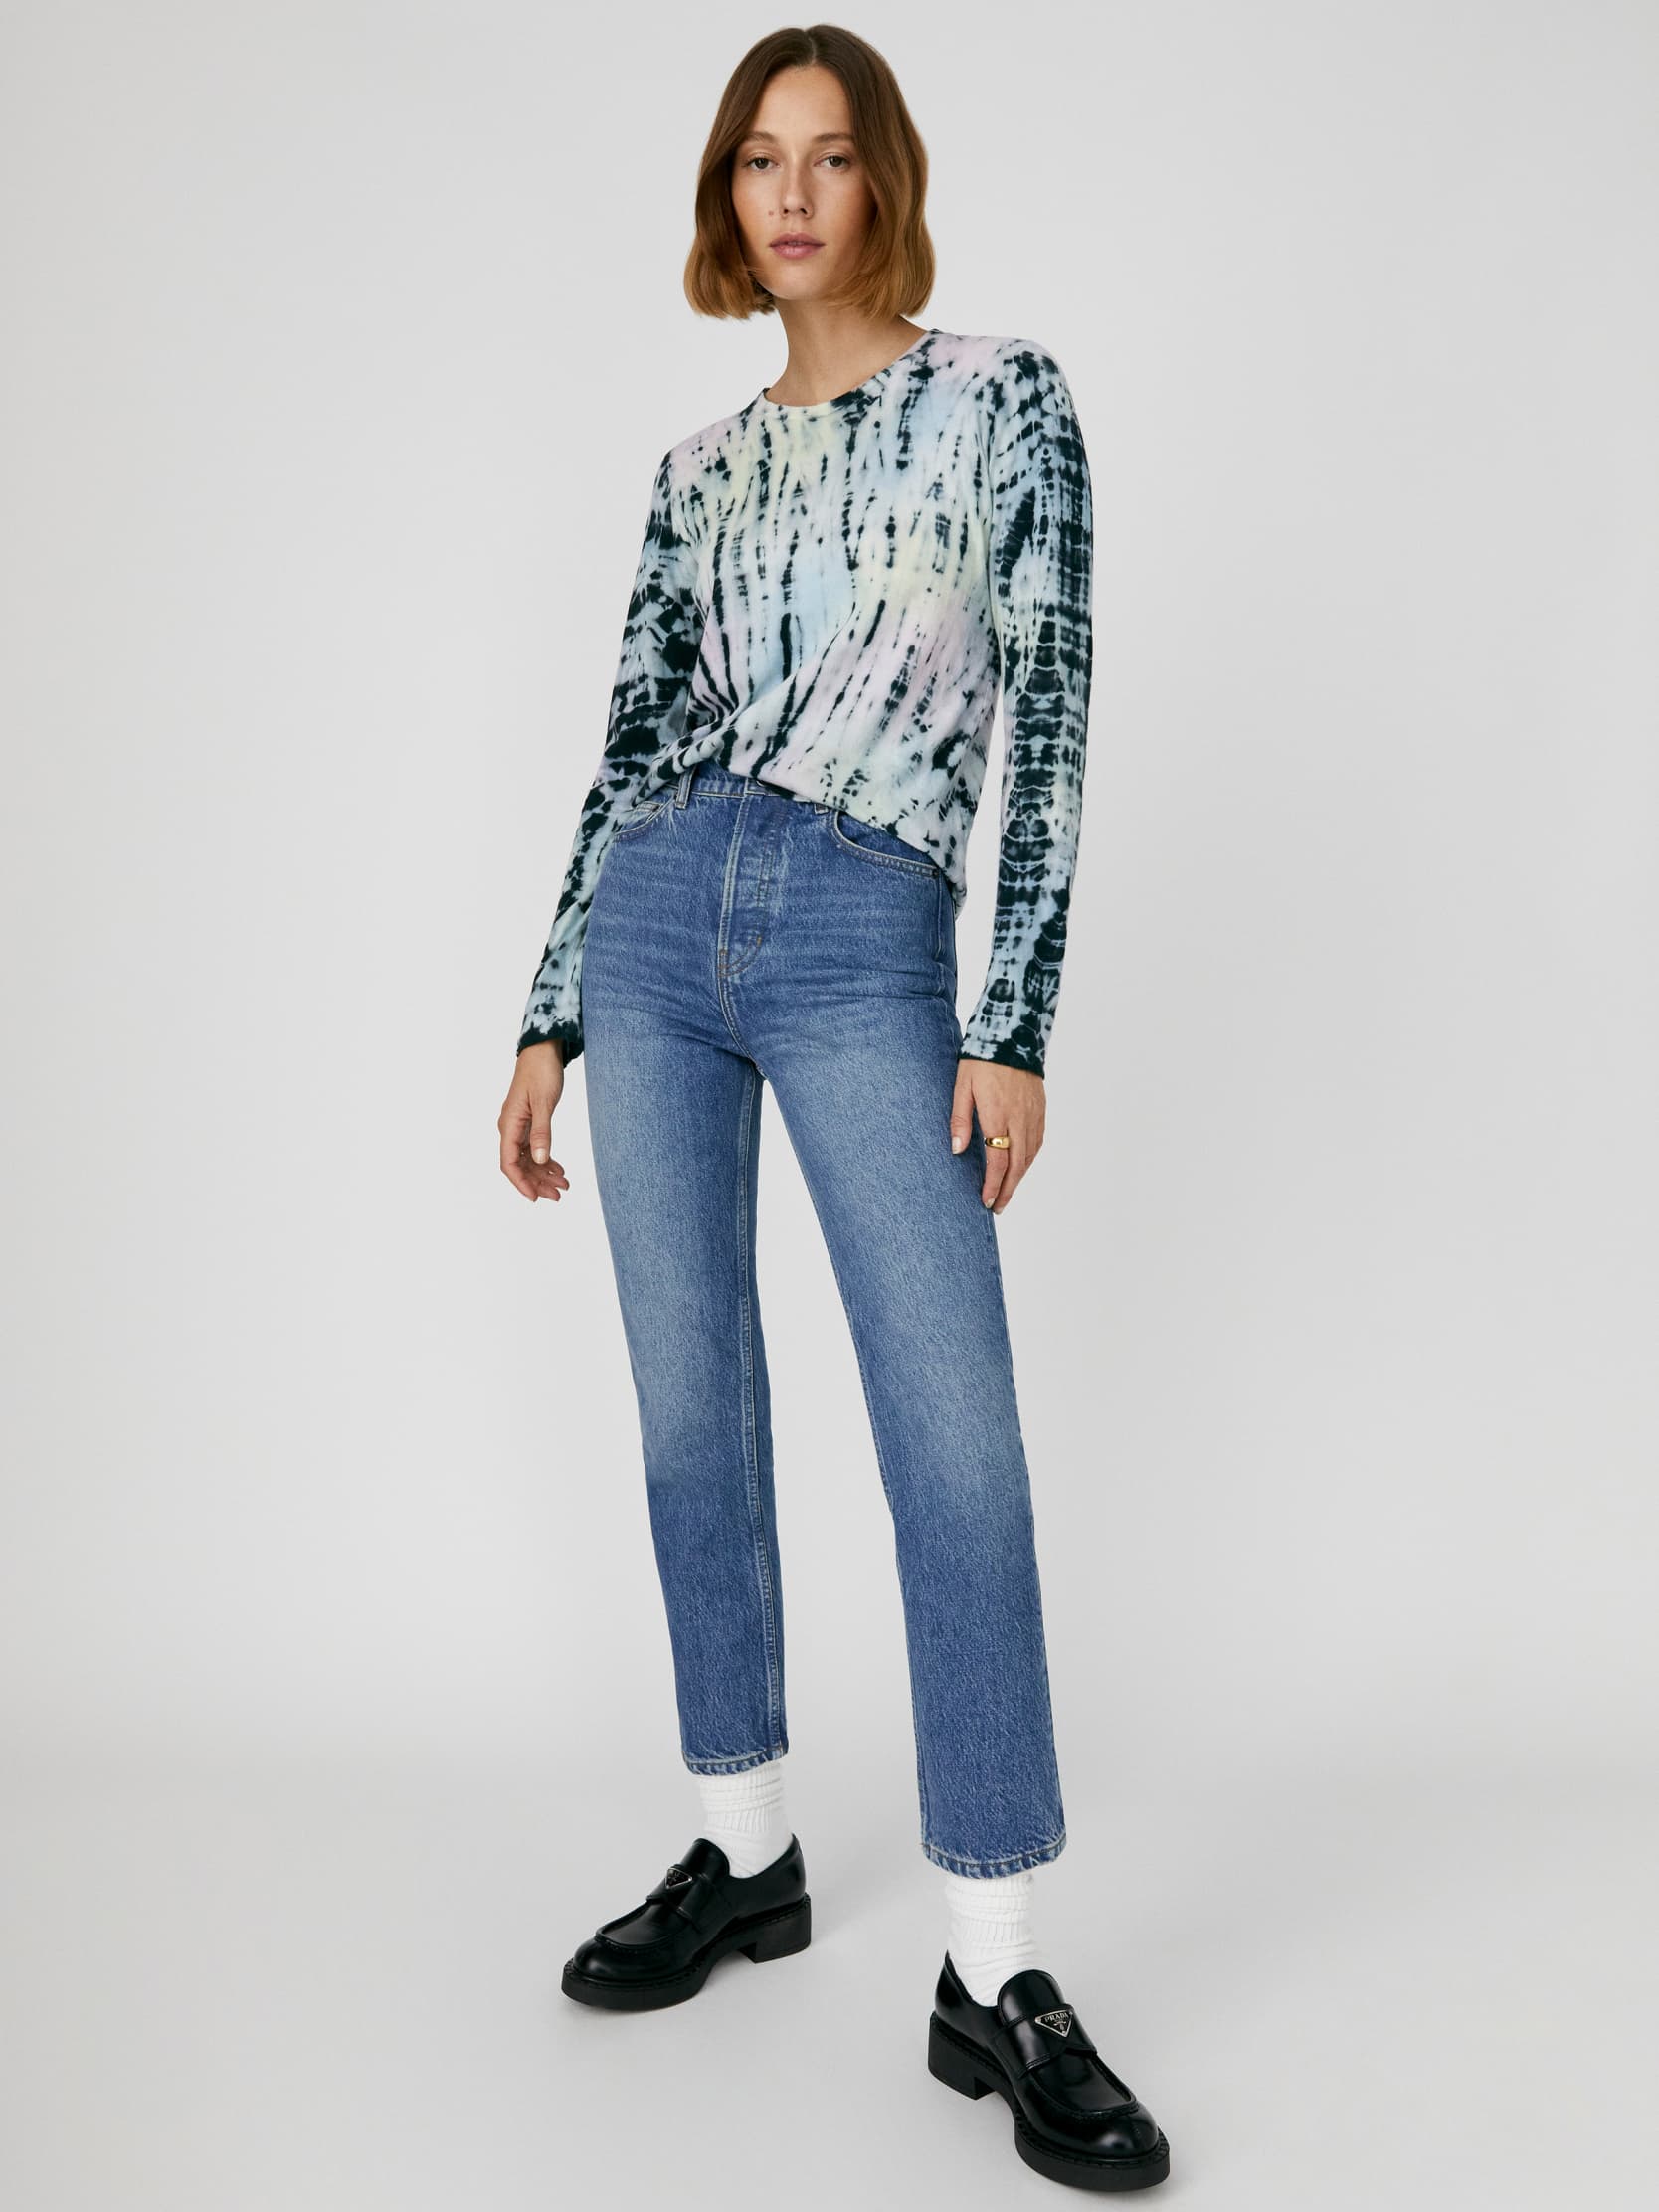 Women's Jeans and Denim | Reformation